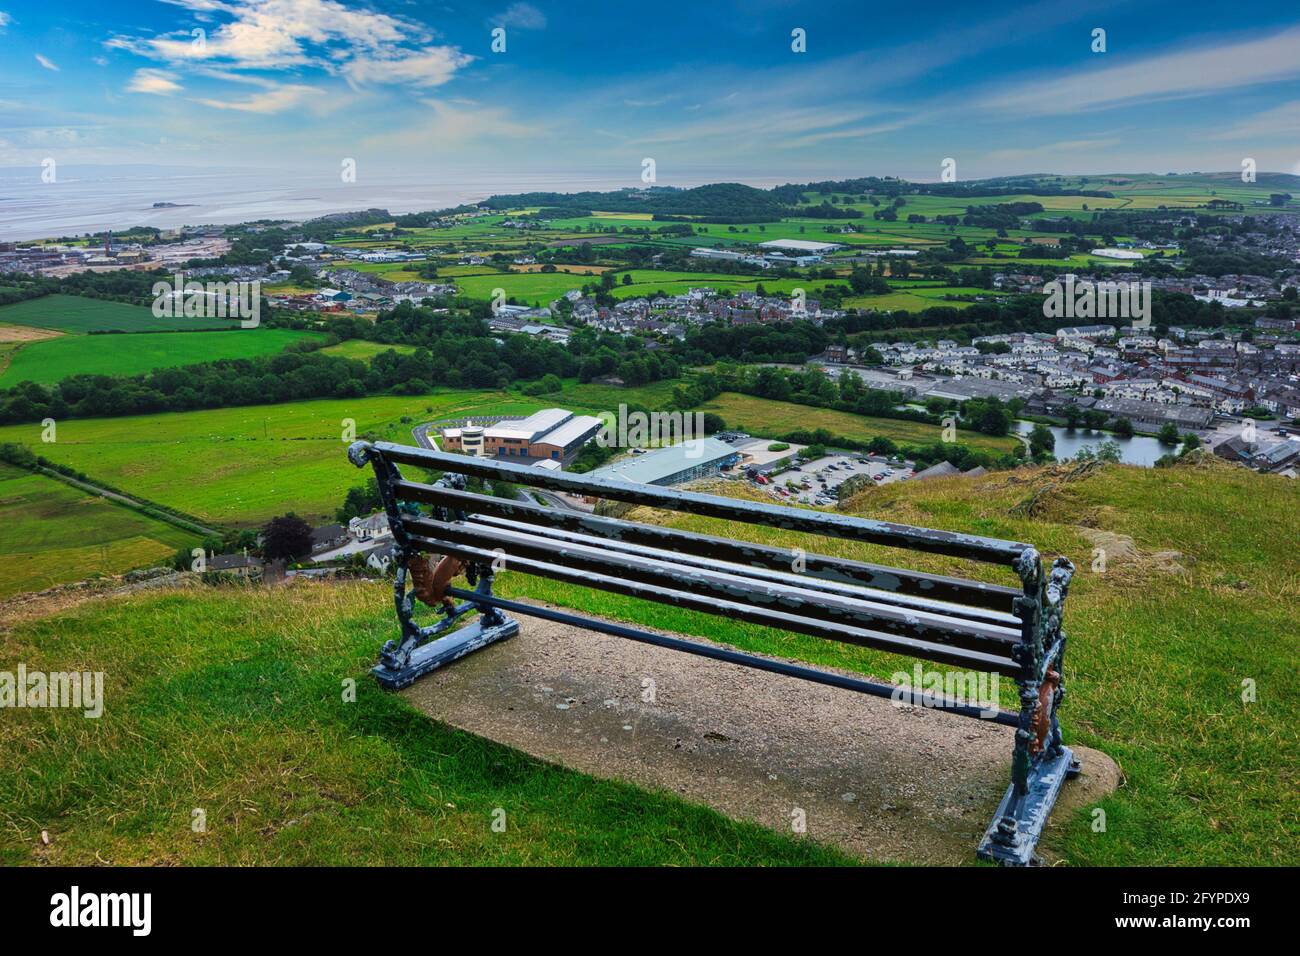 A view of Ulverston from the Hoad Monument, South Lakeland district of Cumbria, England. Stock Photo